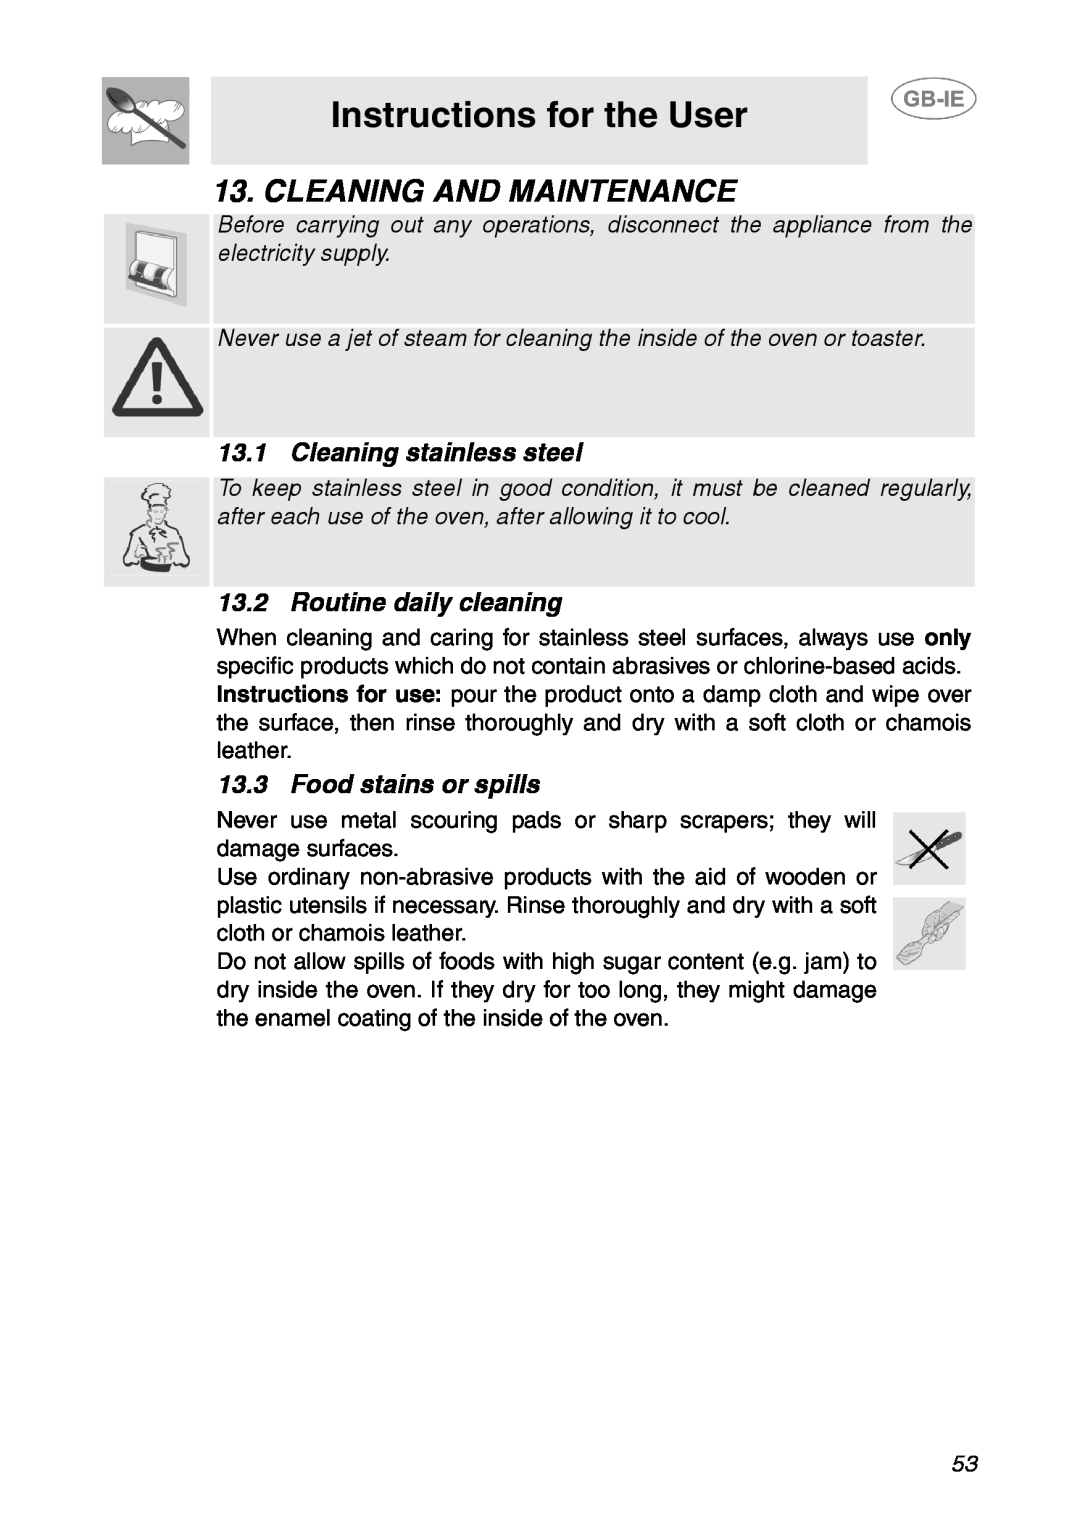 Smeg SE995XT-5 manual Cleaning And Maintenance, Instructions for the User, Cleaning stainless steel, Routine daily cleaning 